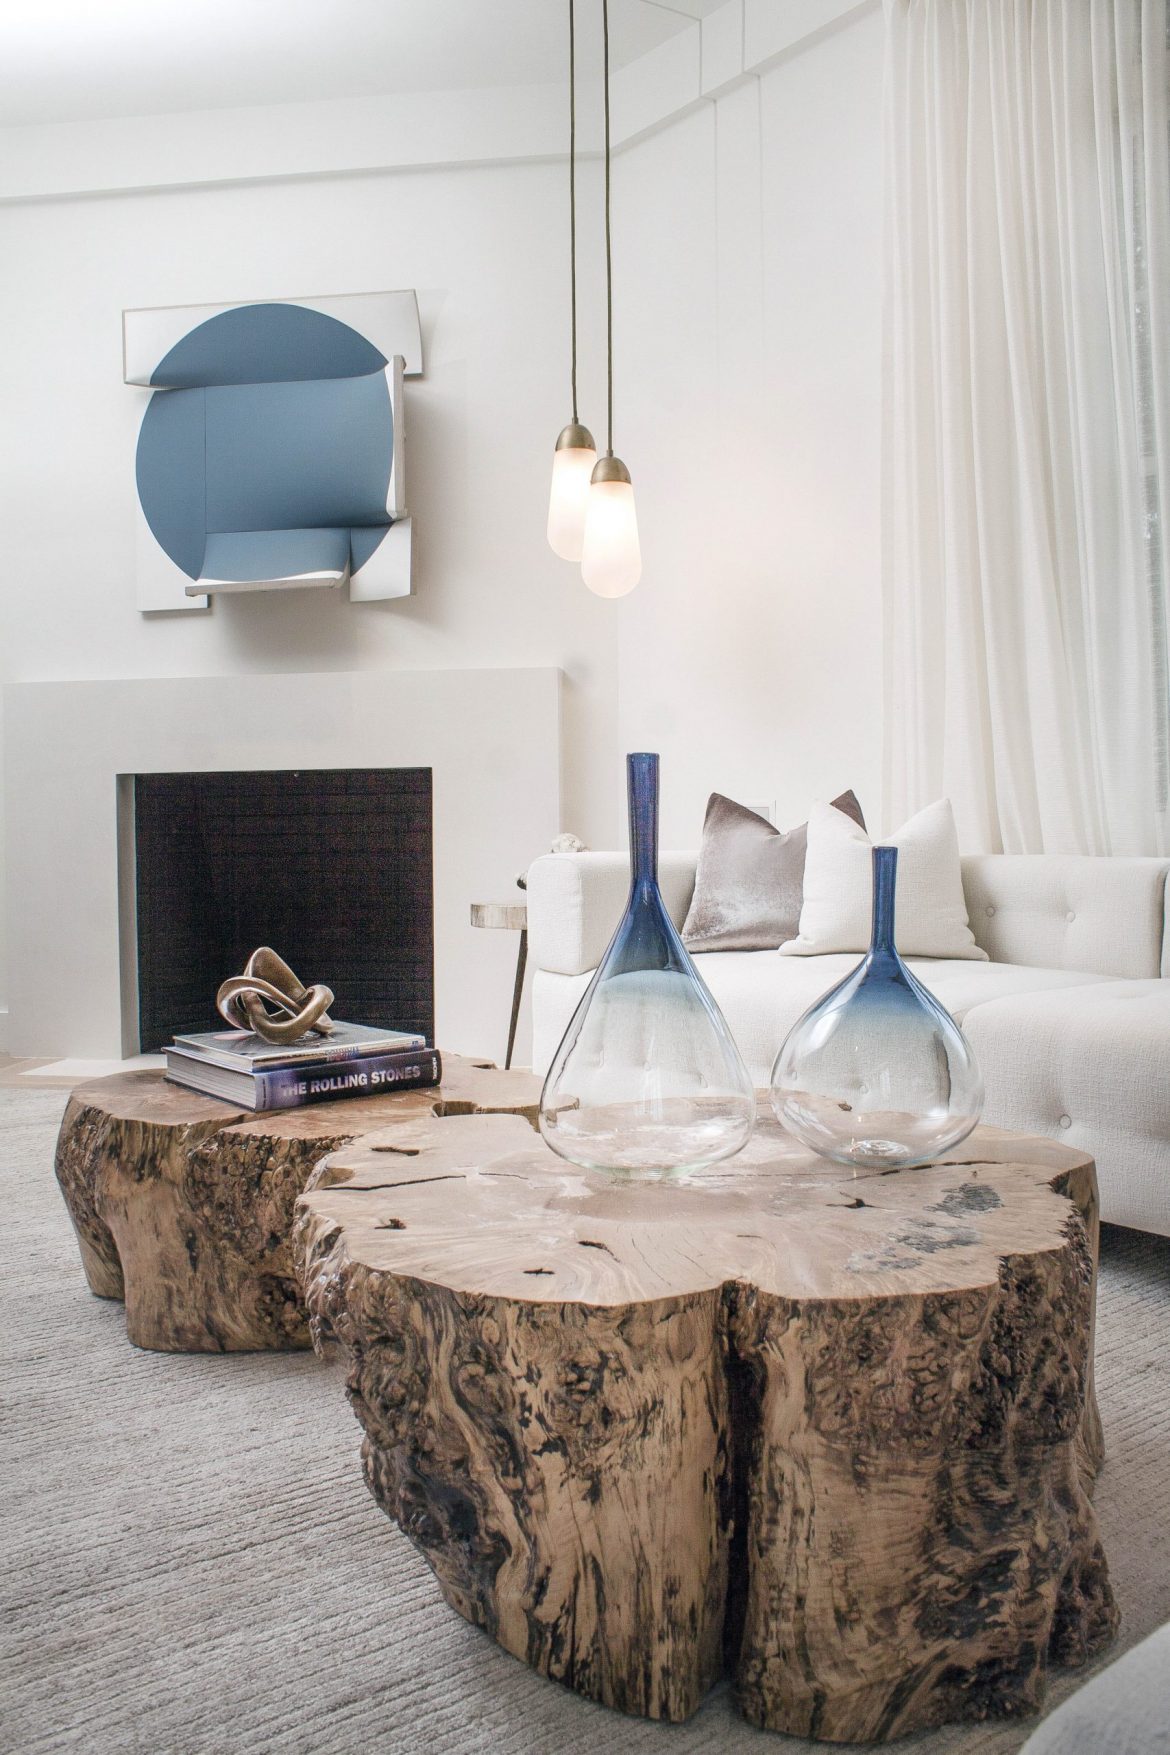 Lori Margolis: Eclectic, Sophisticated And High Fashion Interiors